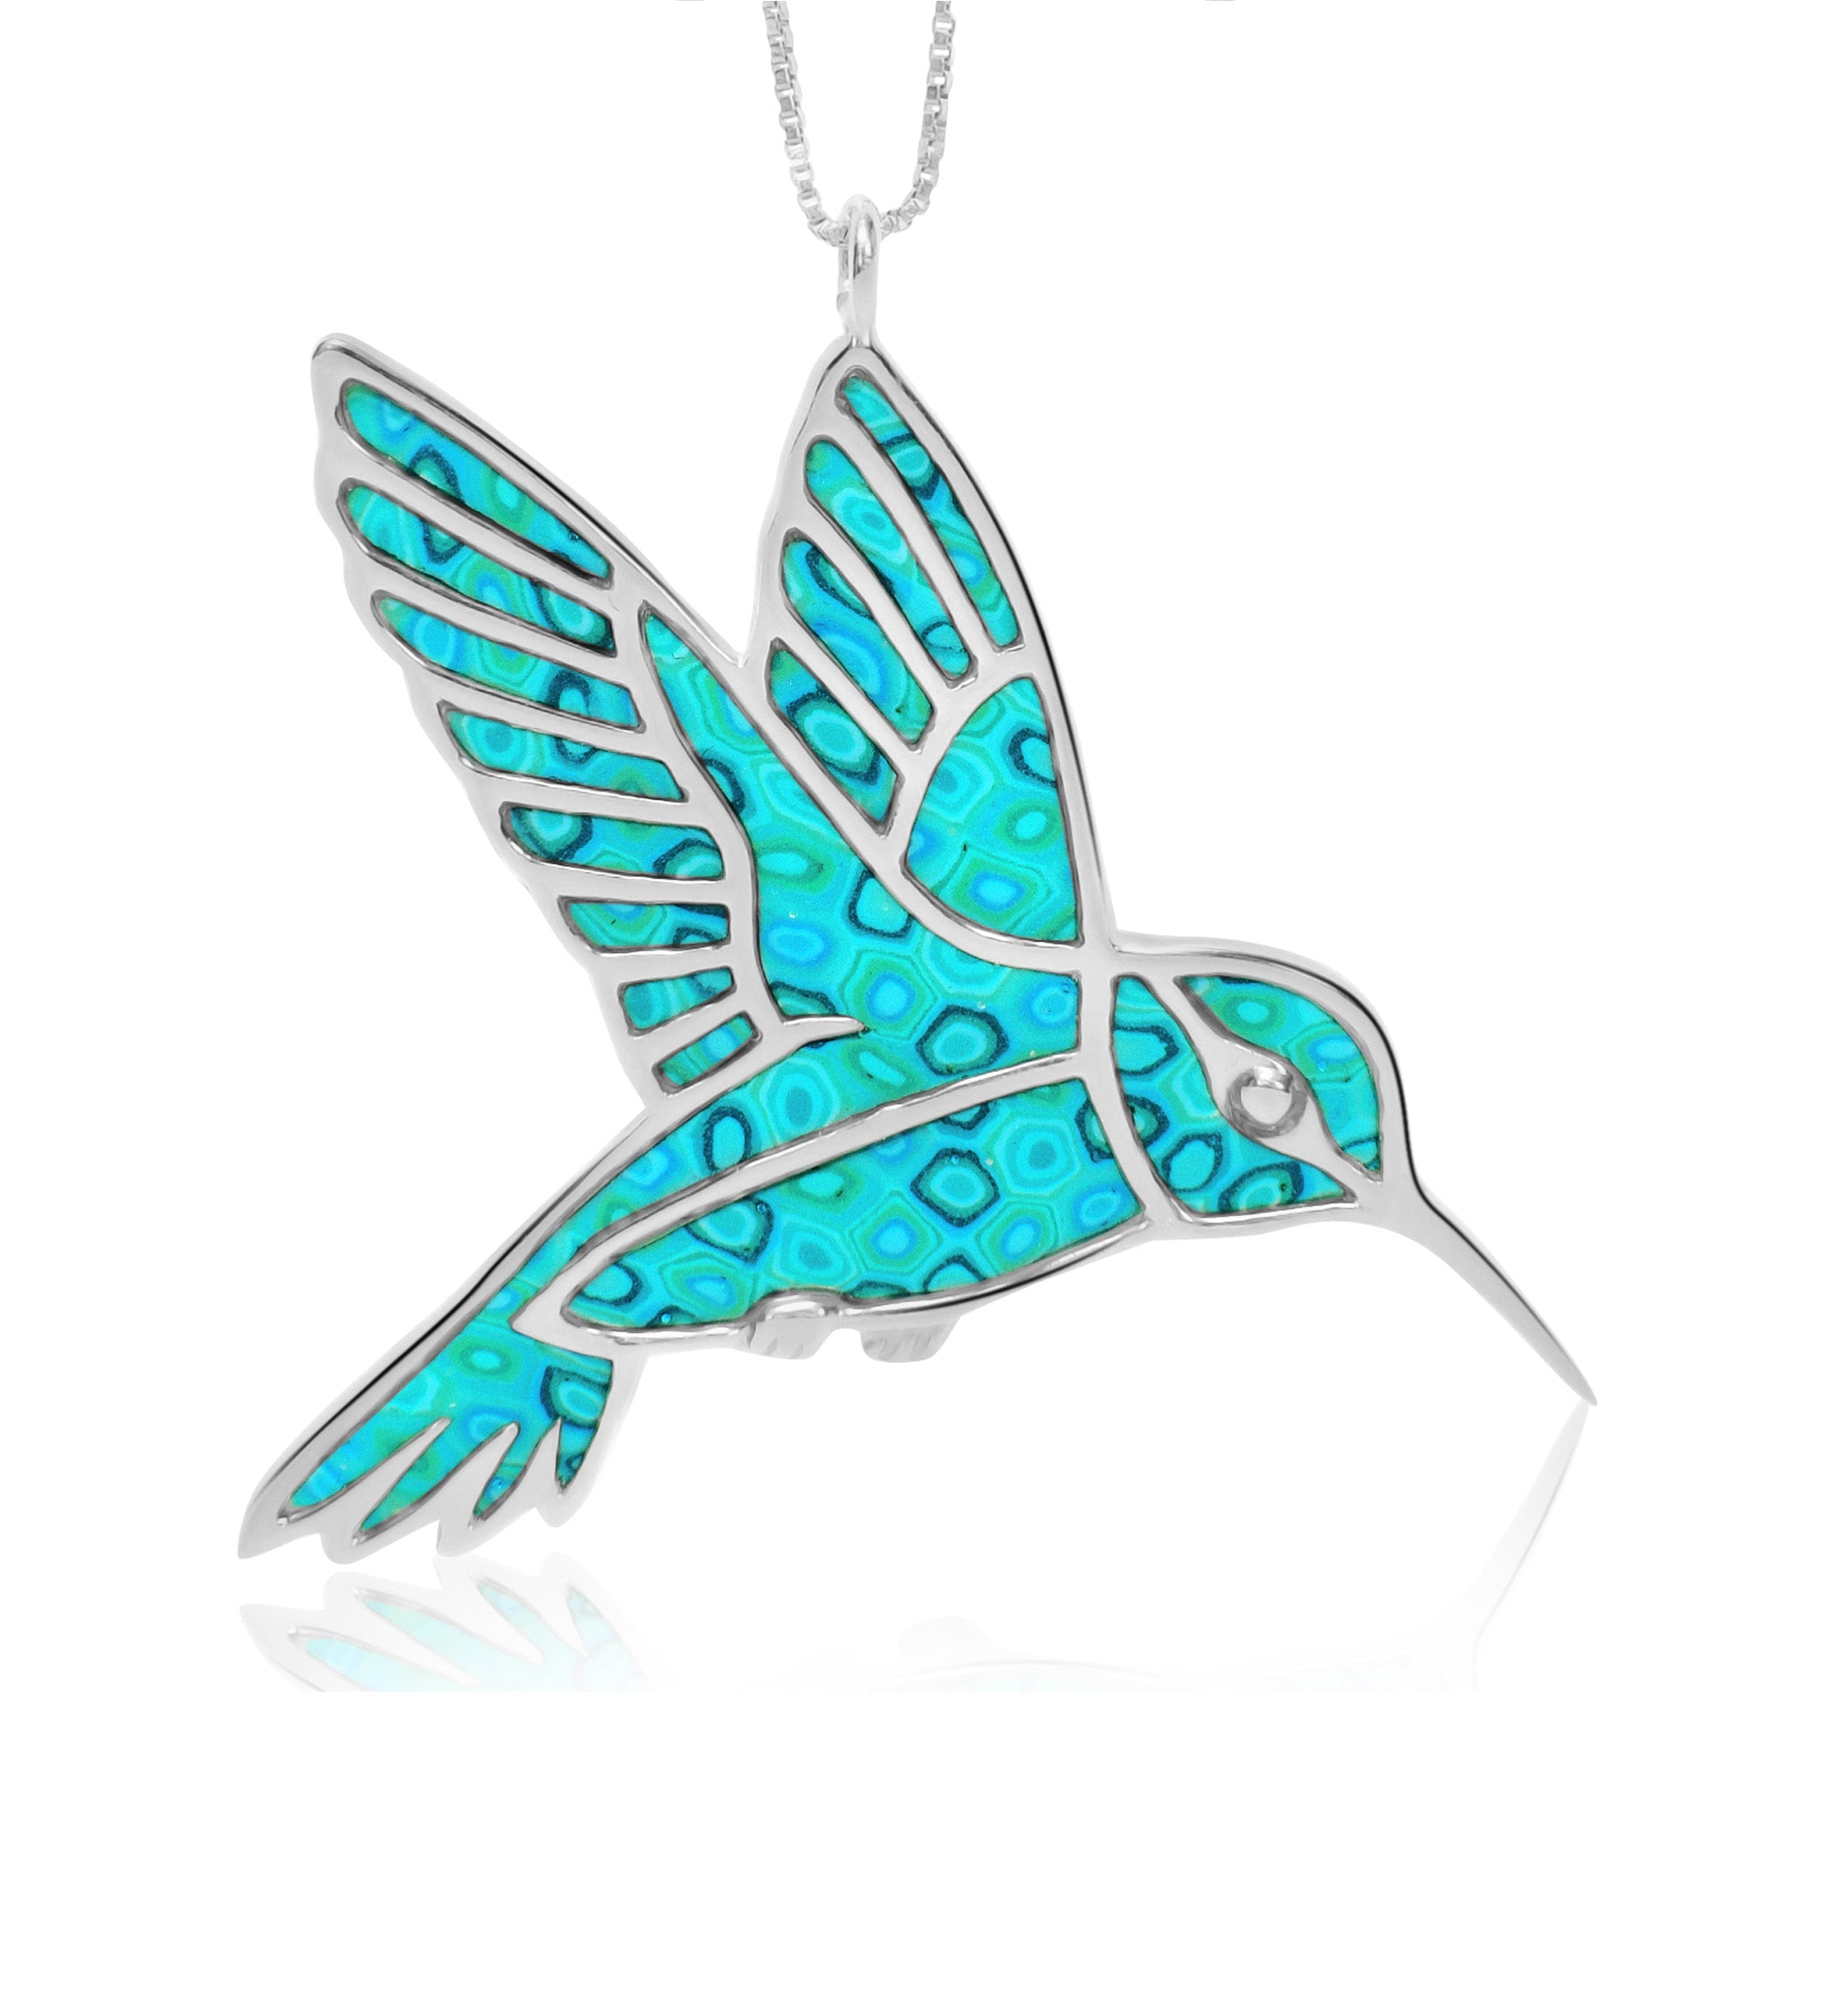 A woman with windswept hair, wearing a sequined top and a 925 Sterling Silver Hummingbird Necklace Handcrafted Pendant, smiling against a white background.